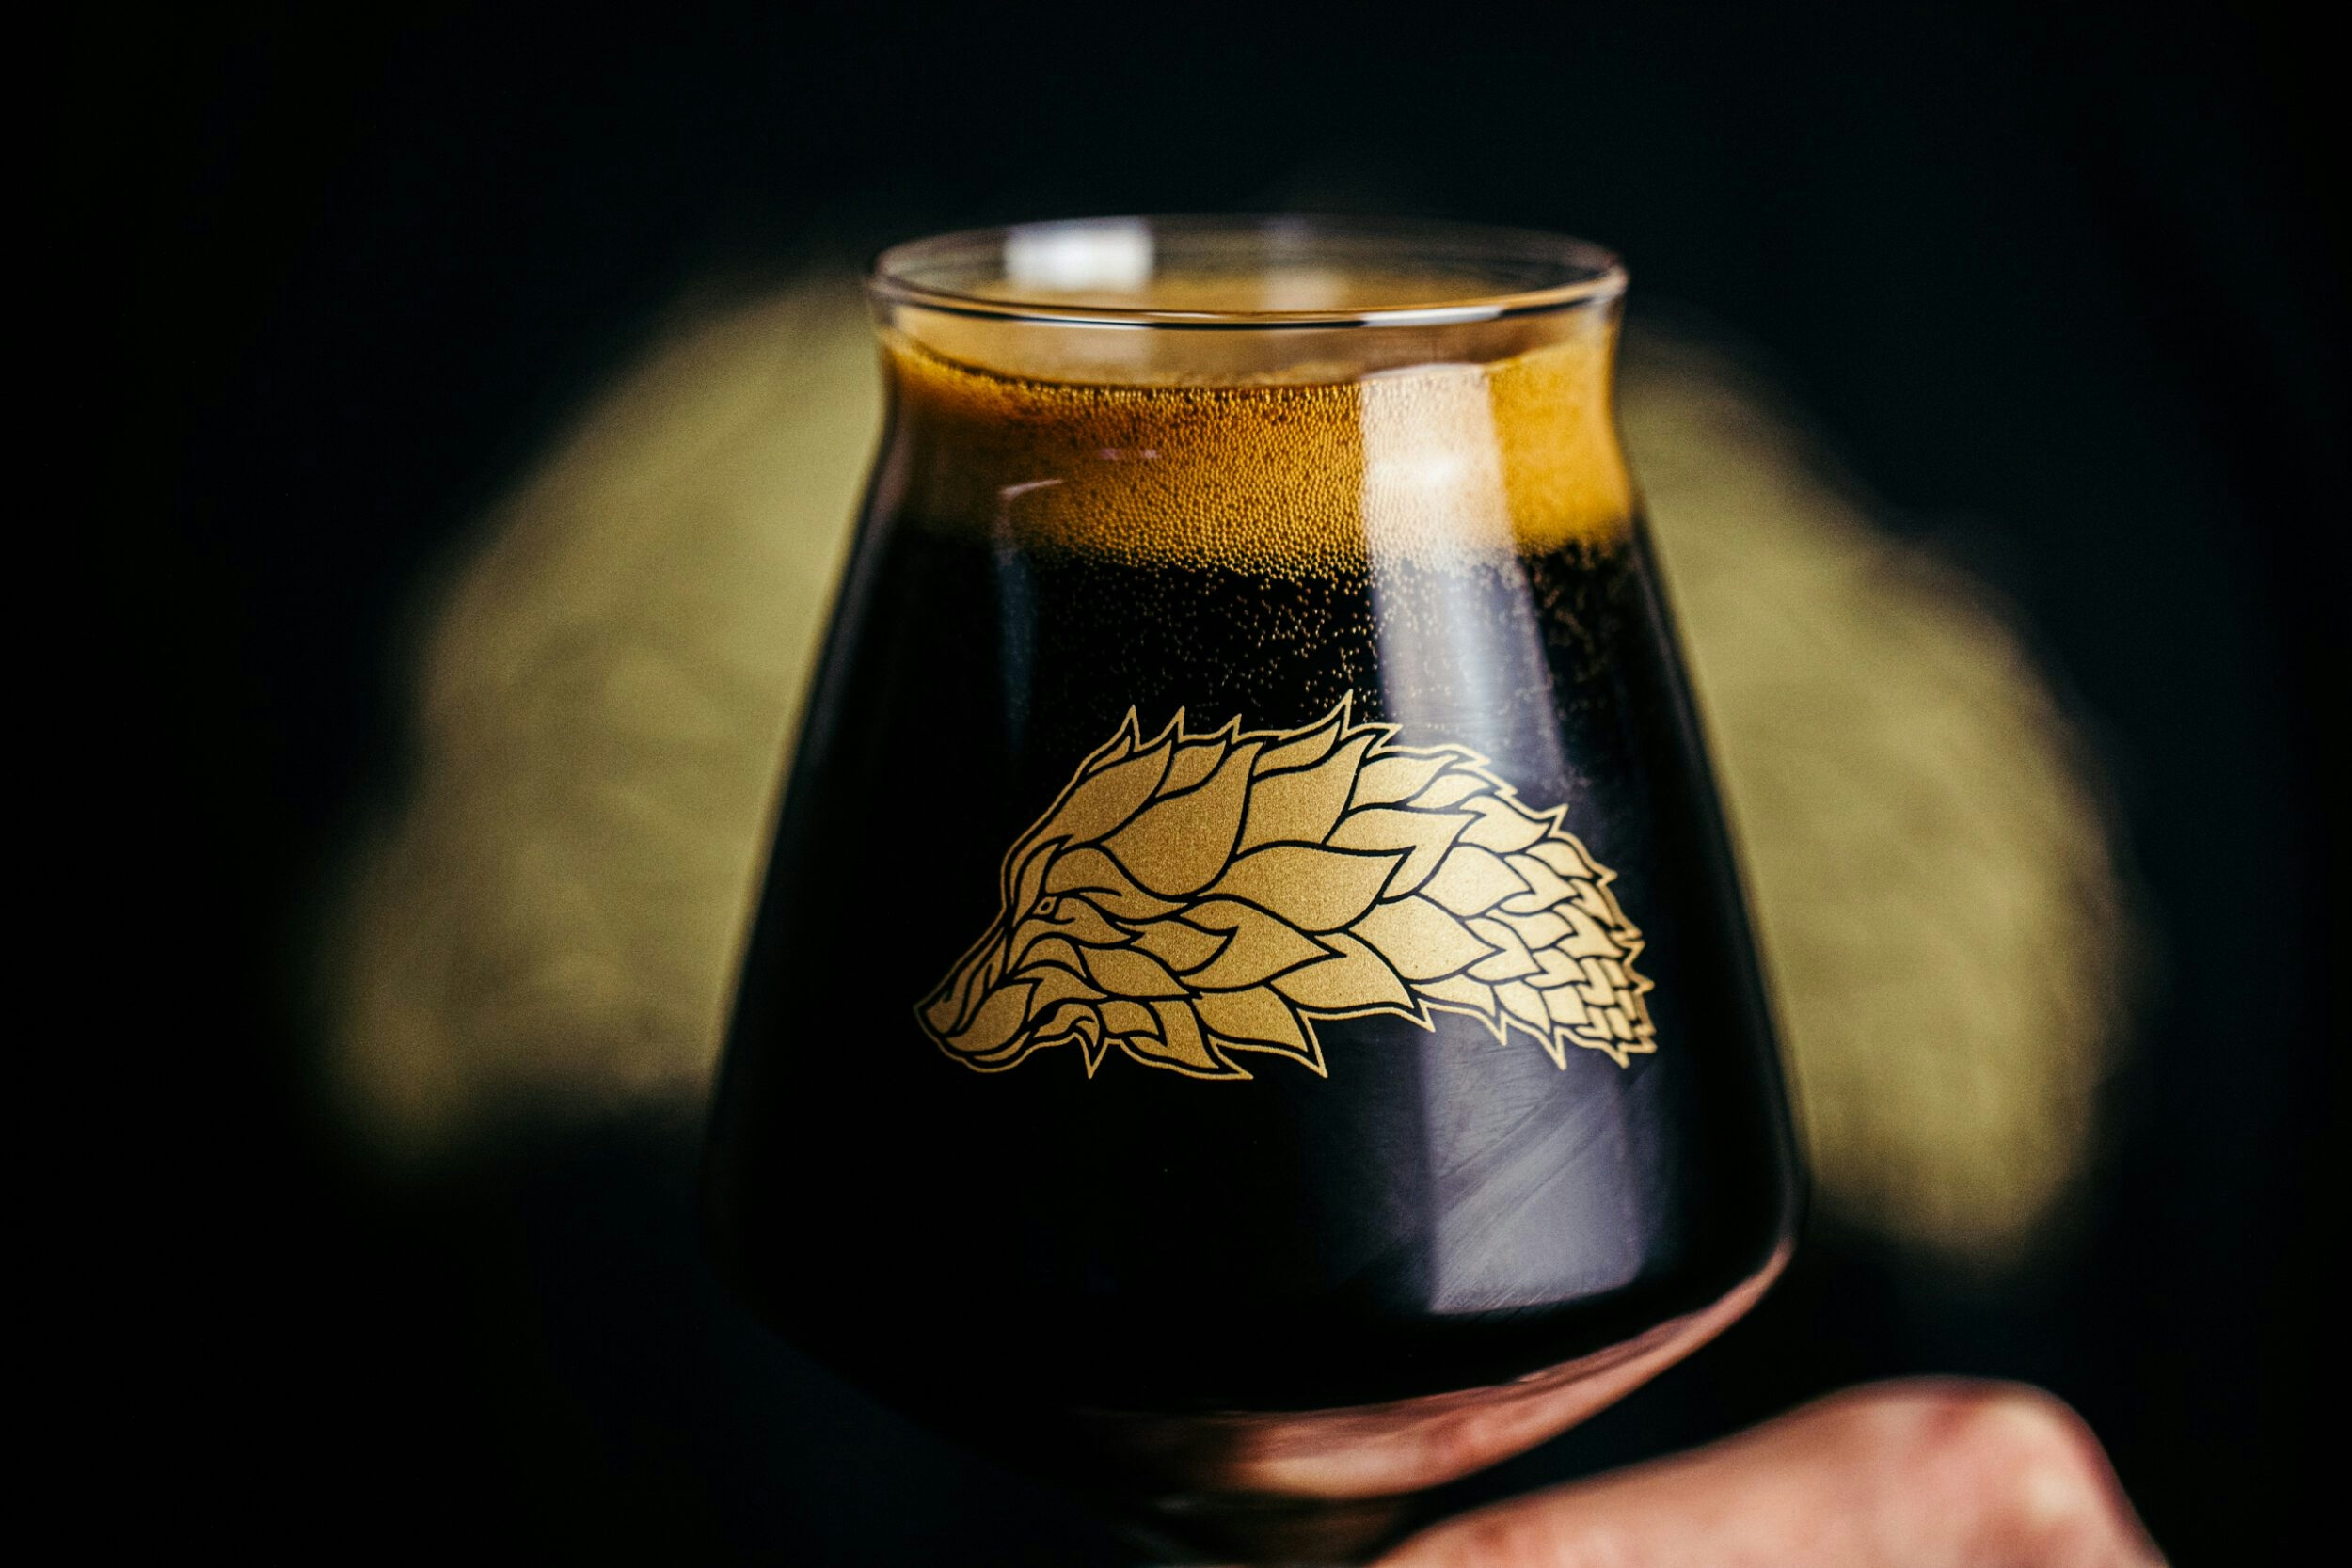 Dark Alpha Hop Society beer in a glass with a hops image